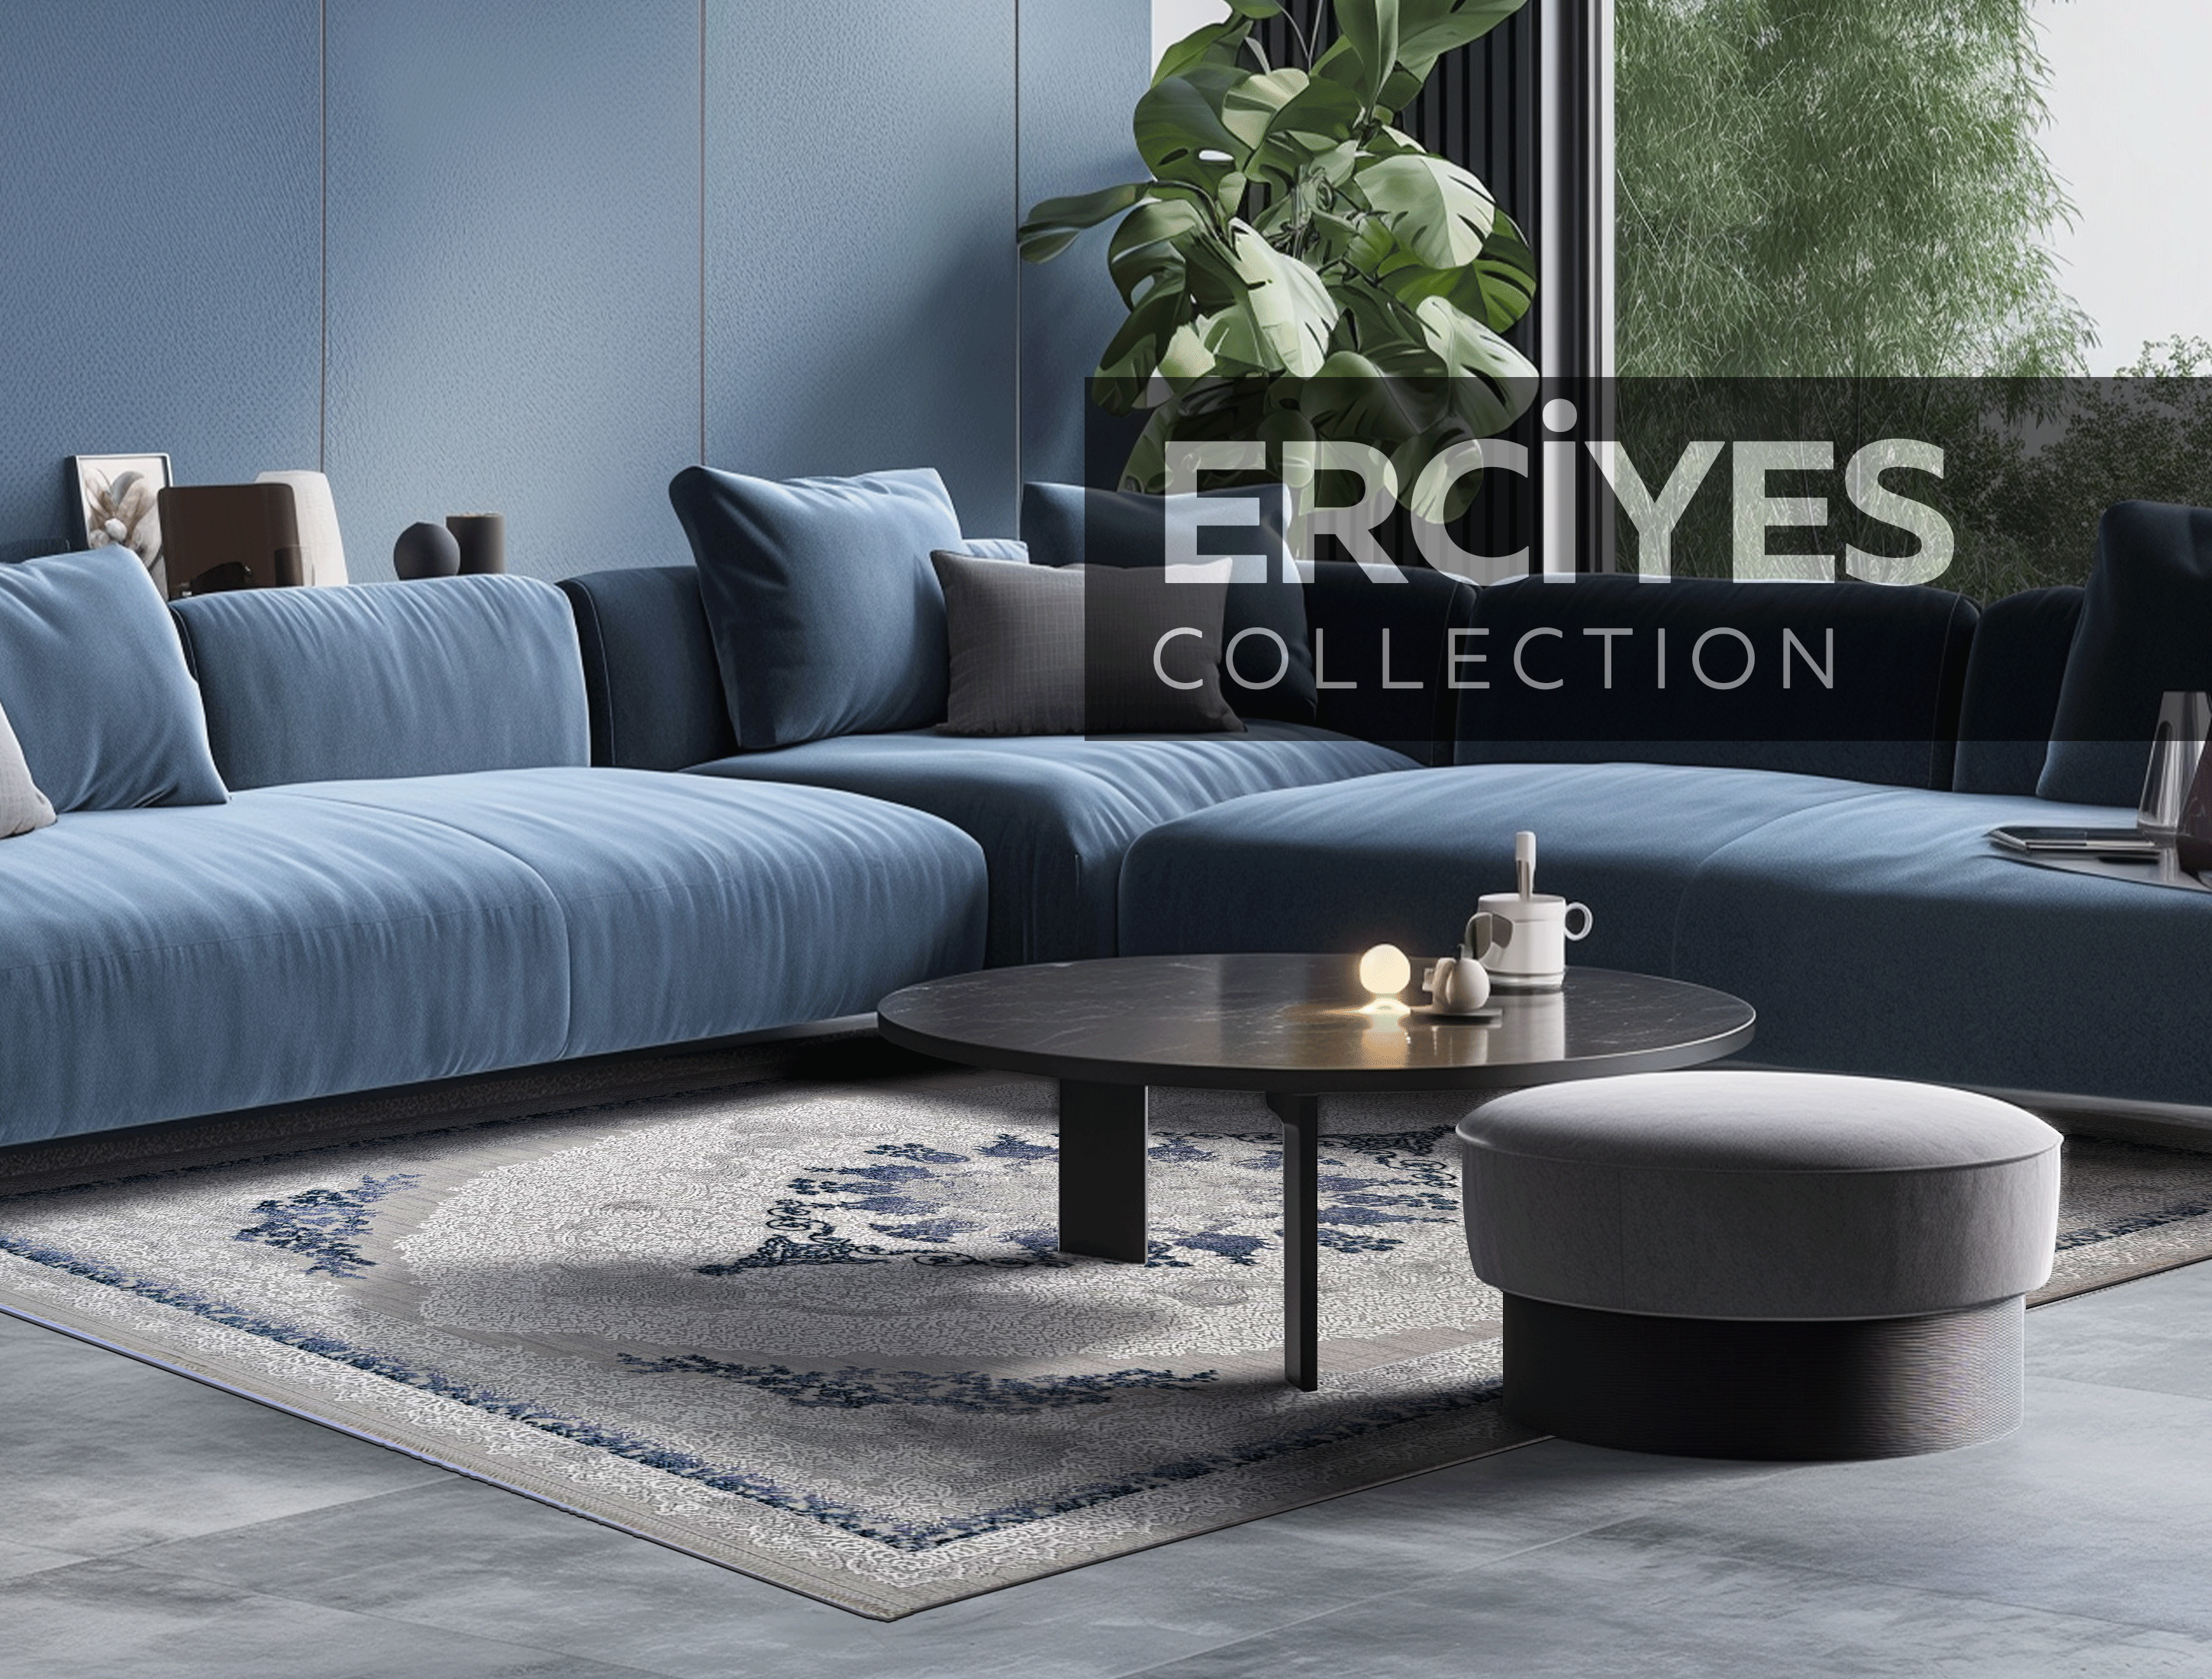 Erciyes Collection